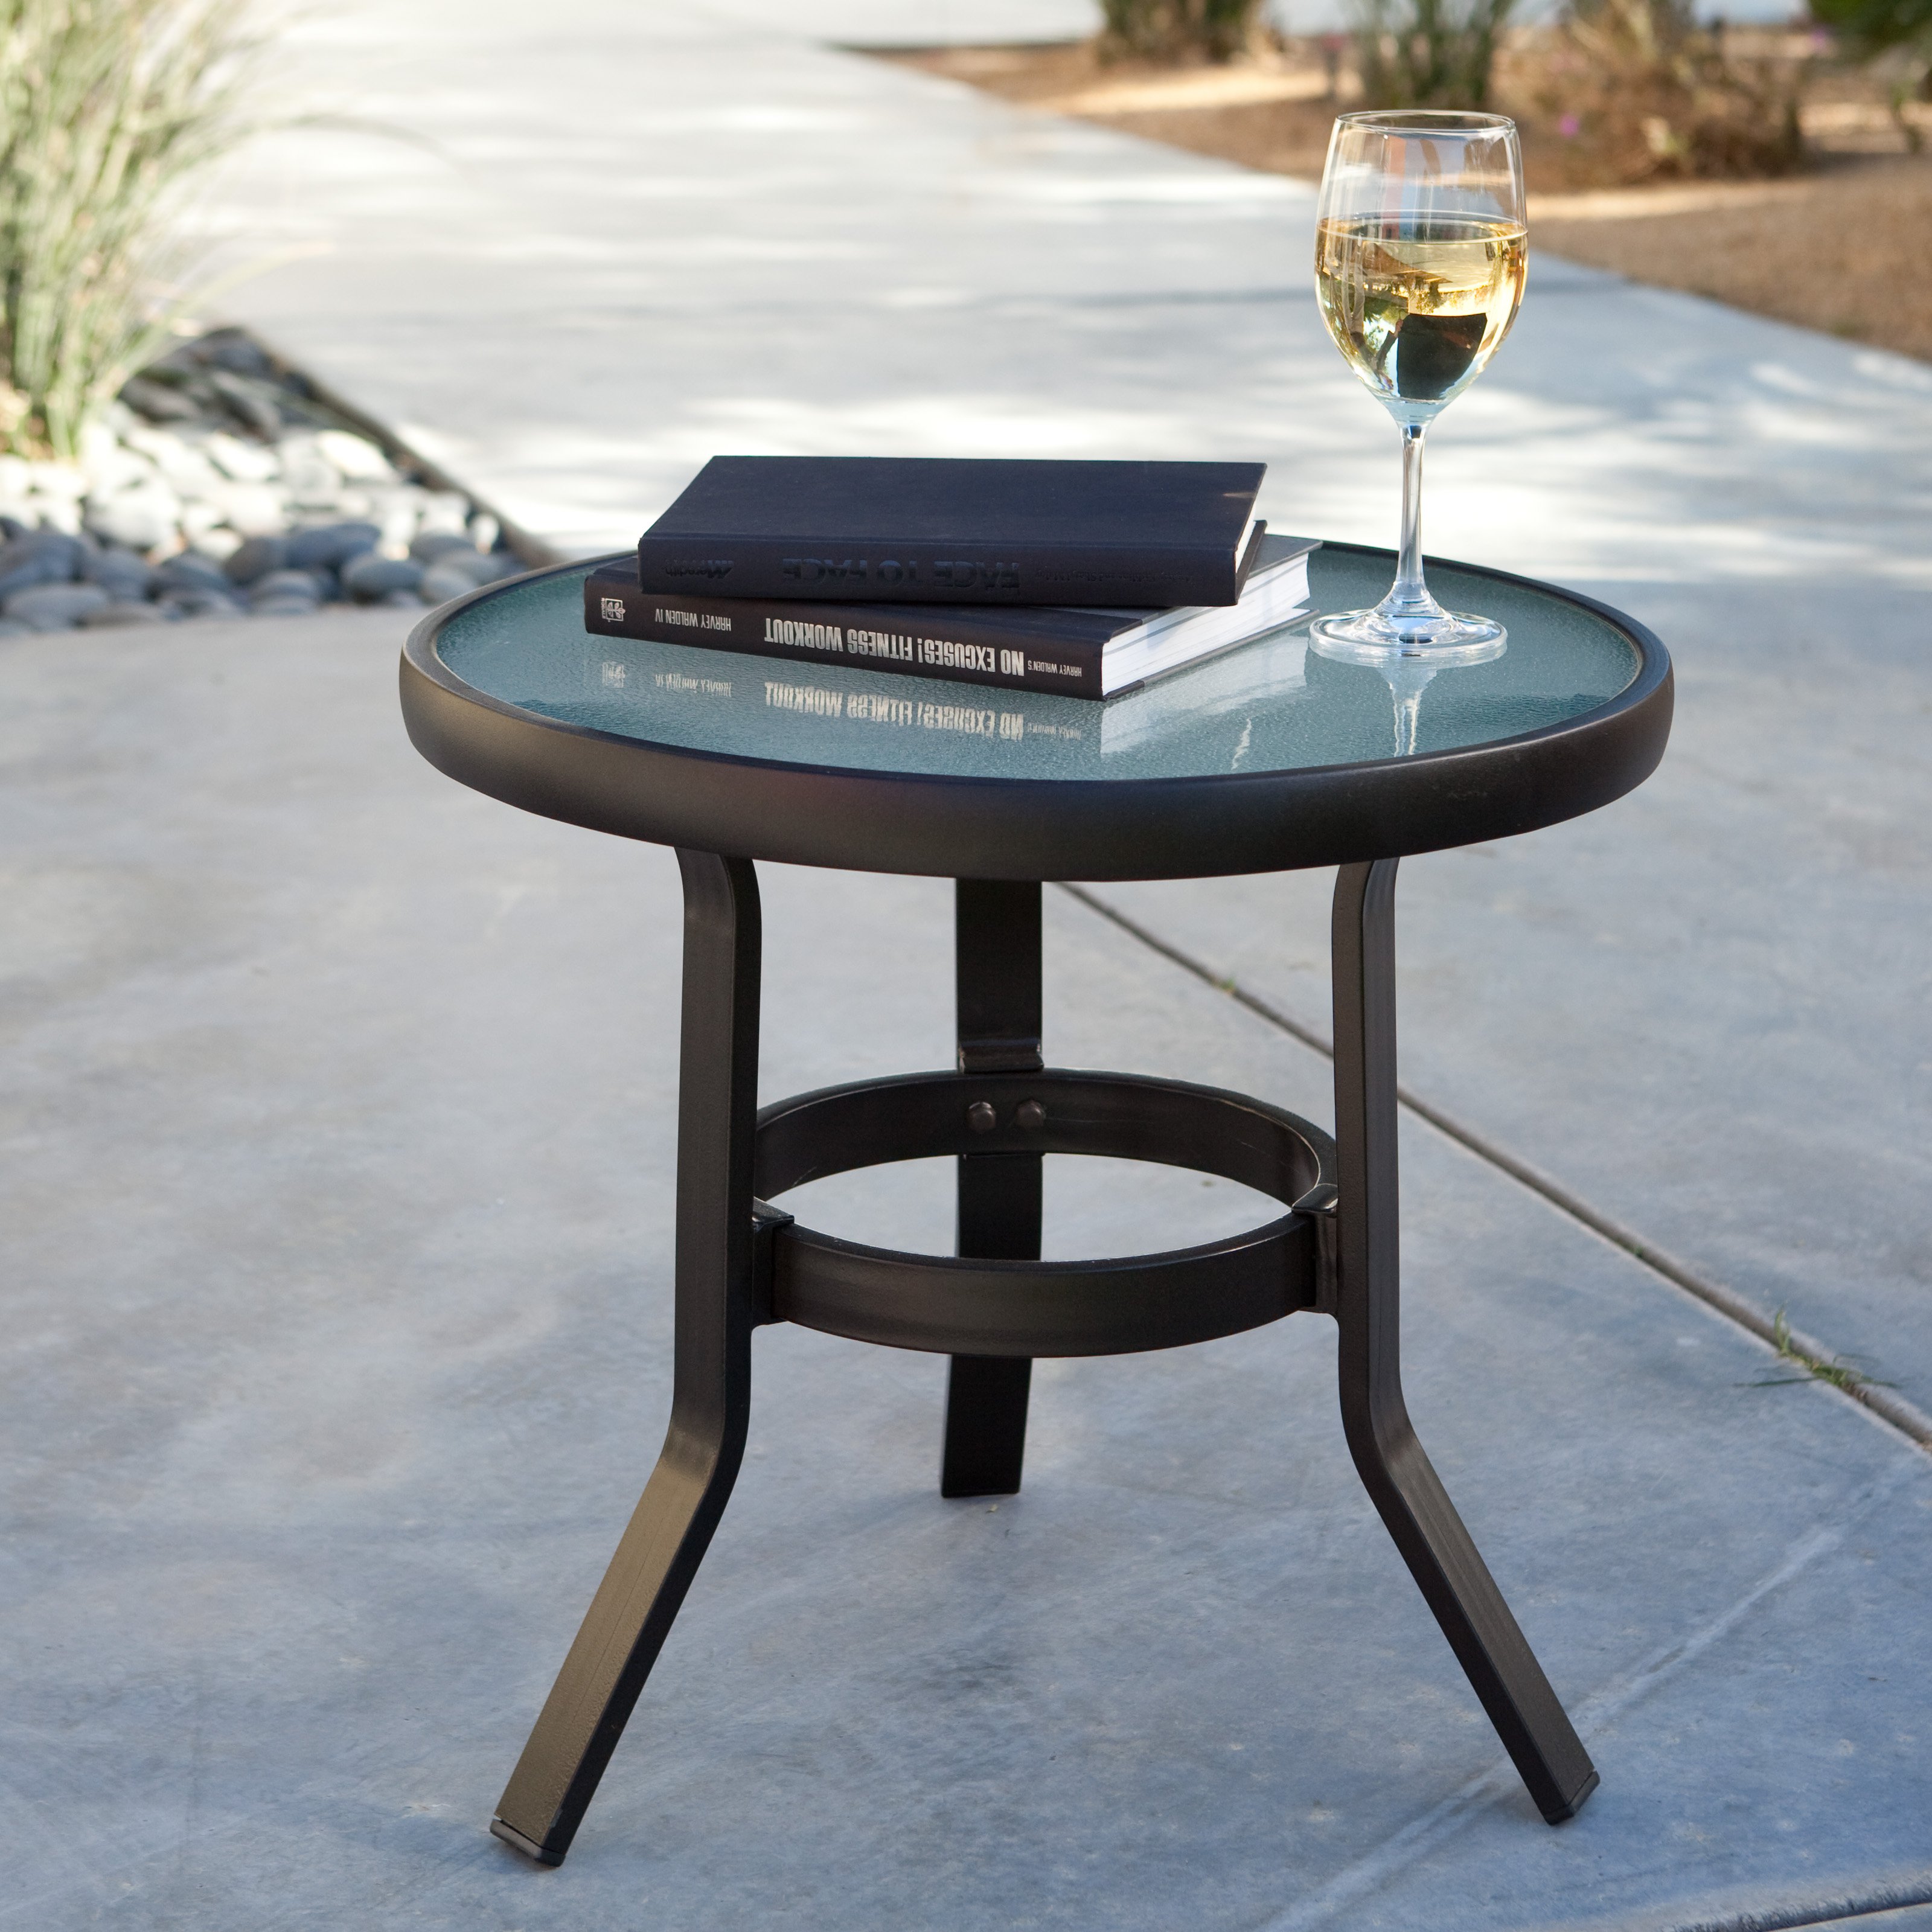 coral coast patio side table accent tables unfinished metal outdoor target leather chair natural cherry brass and glass dining clearance bathtub pier promo code pieces for room